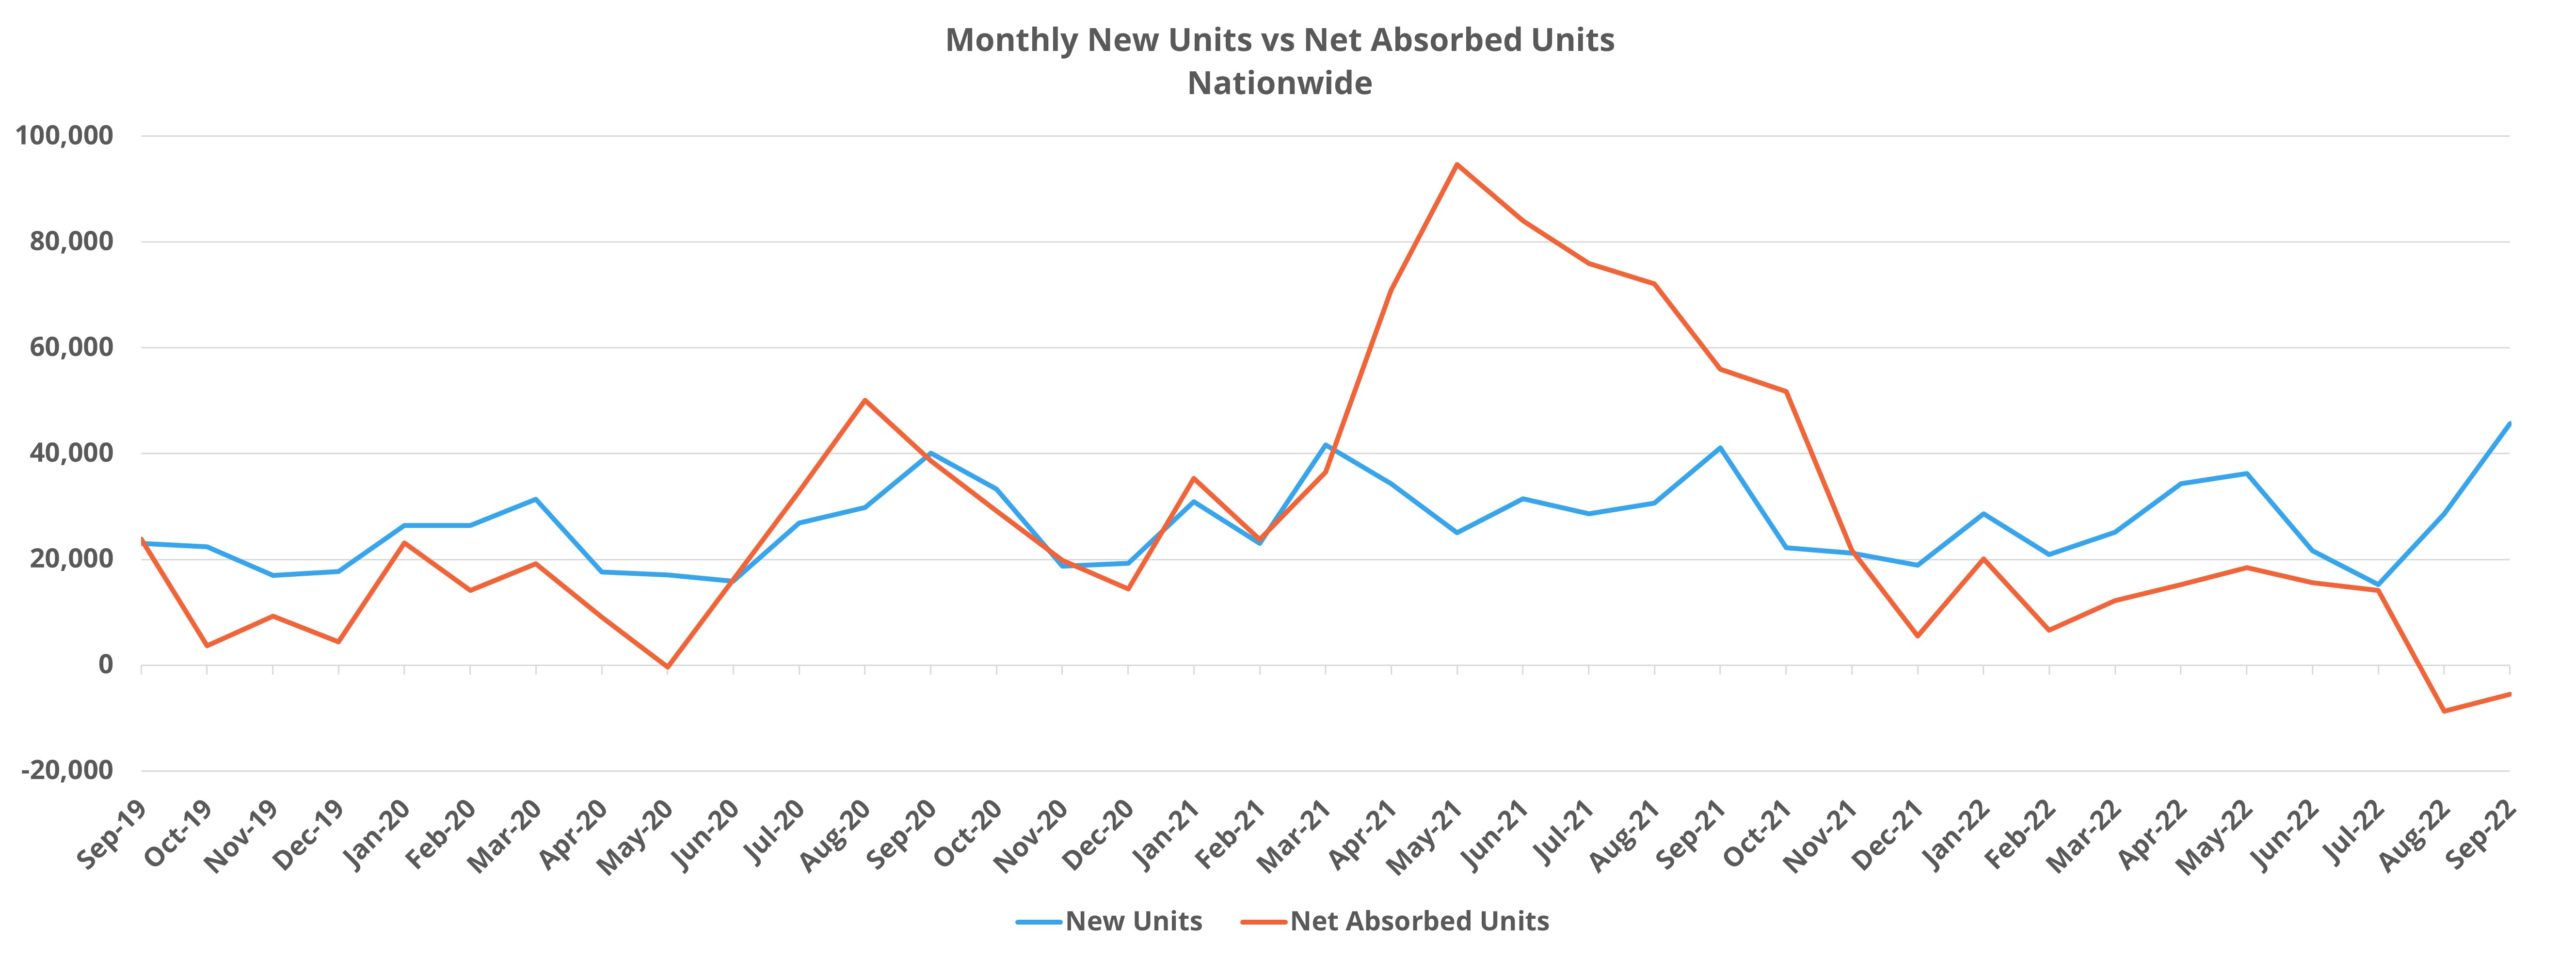 Monthly New Units vs Net Absorbed Units